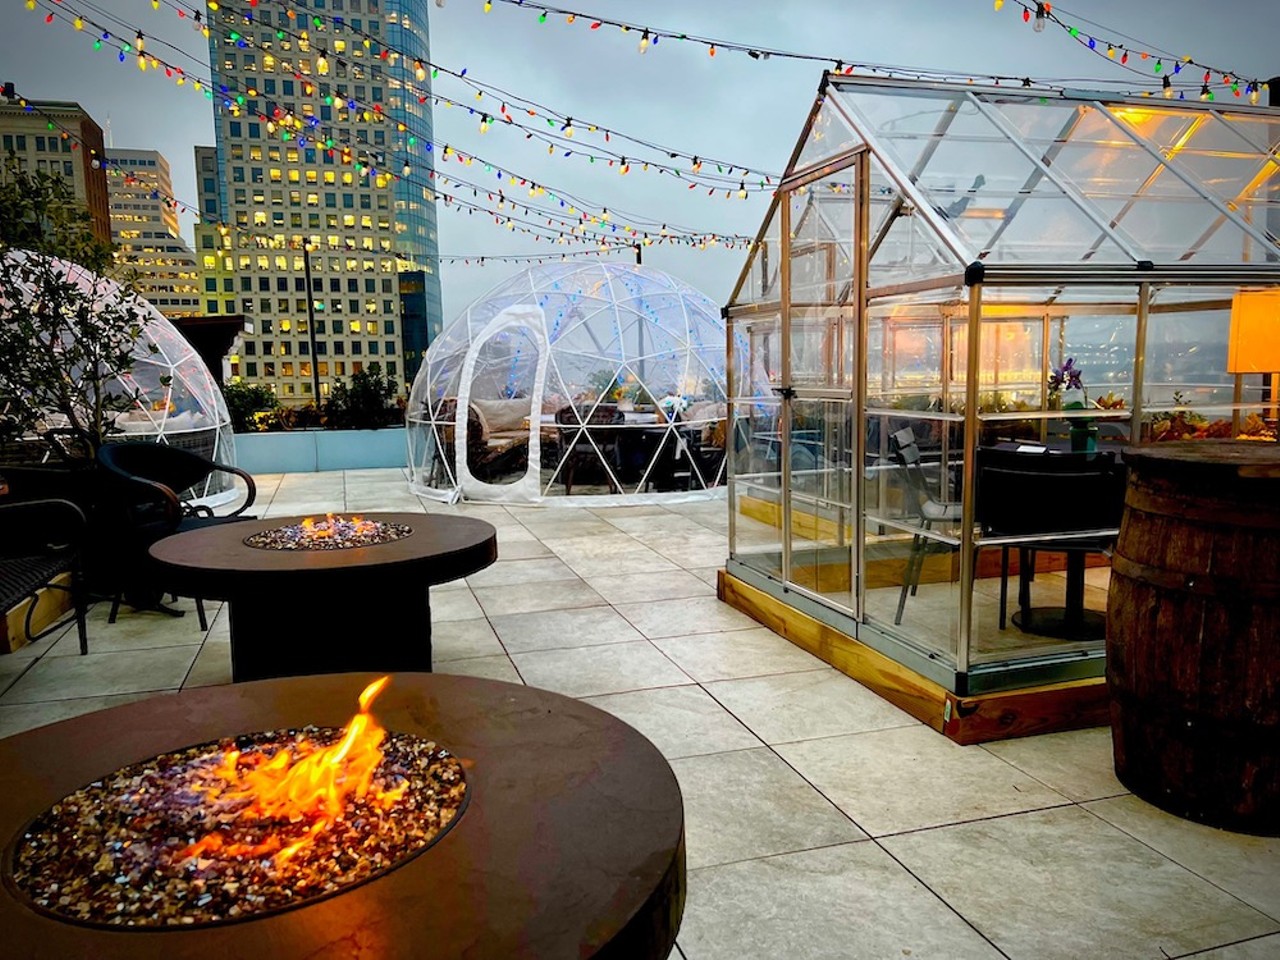 Shires’ Rooftop
309 Vine St., 10th floor, Downtown
Shires’ Rooftop has brought back its igloos and special garden greenhouses for the season. Reservations are required in advance for parties of two, four and up to eight people to snag a spot for up to two hours. Each dome has a heater and individual speakers, plus a food and drink minimum.